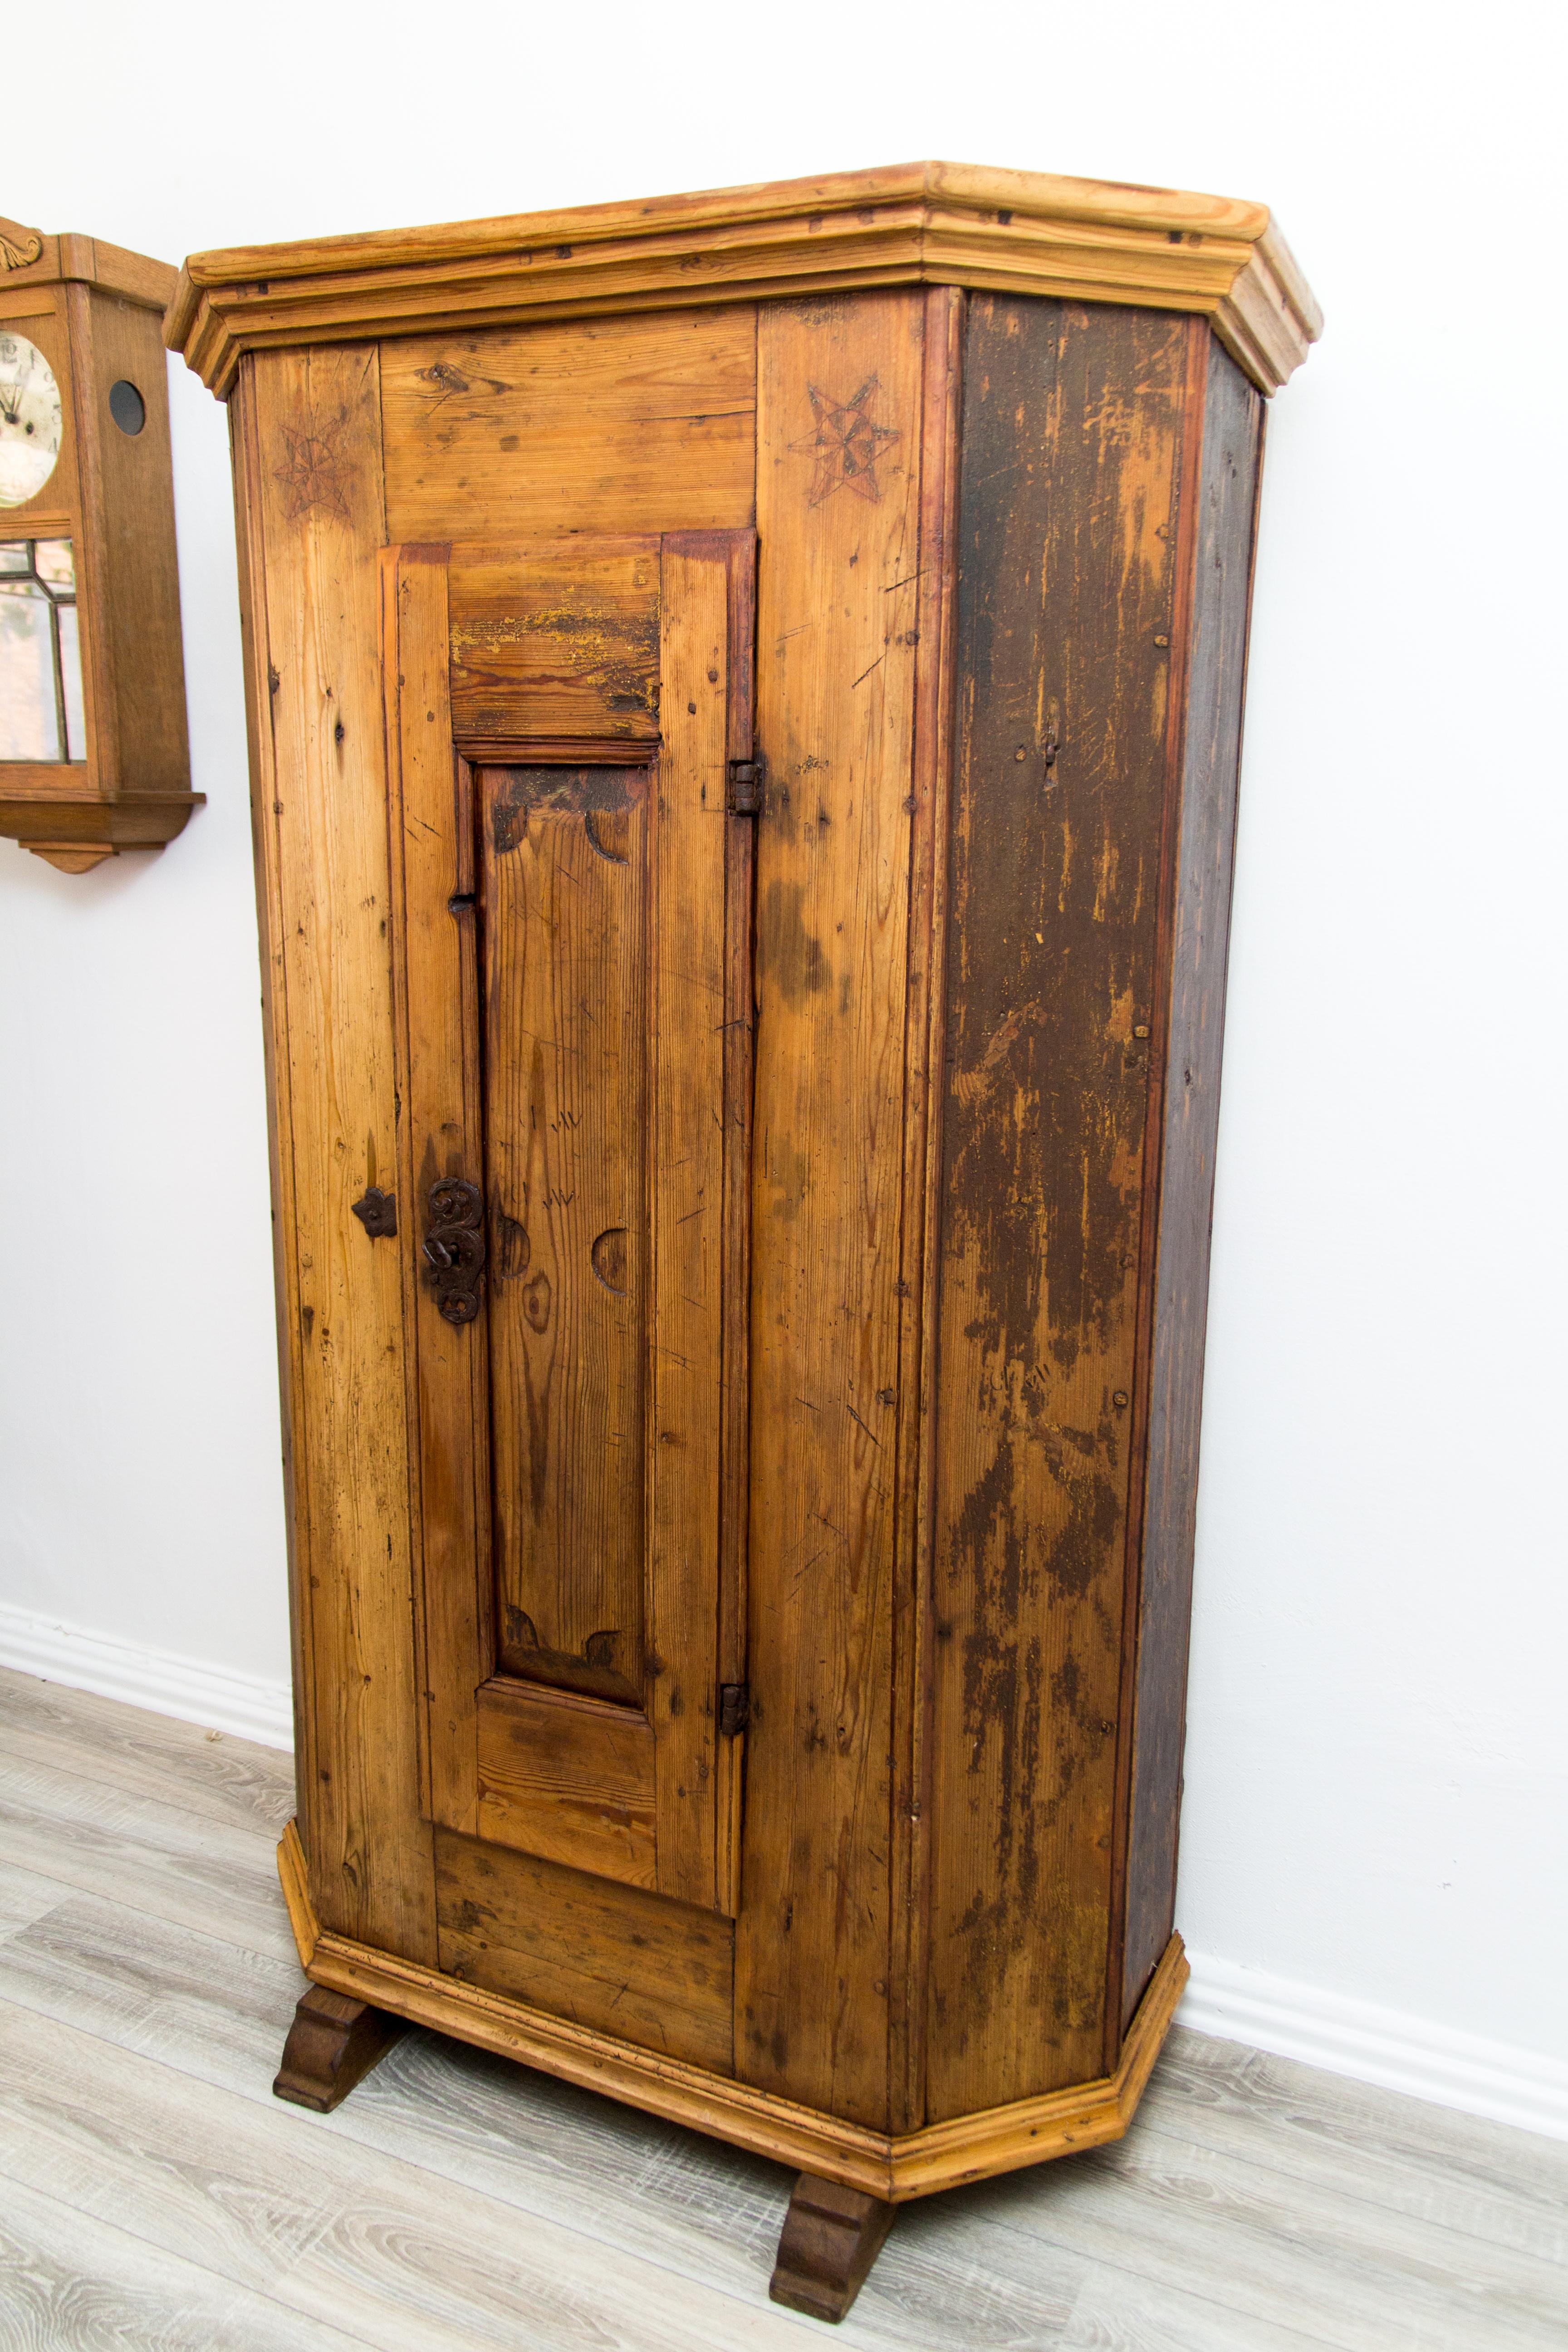 Latvian Antique One-Door Baltic Pine Wood and Iron Handmade Armoire, dated 1830 For Sale